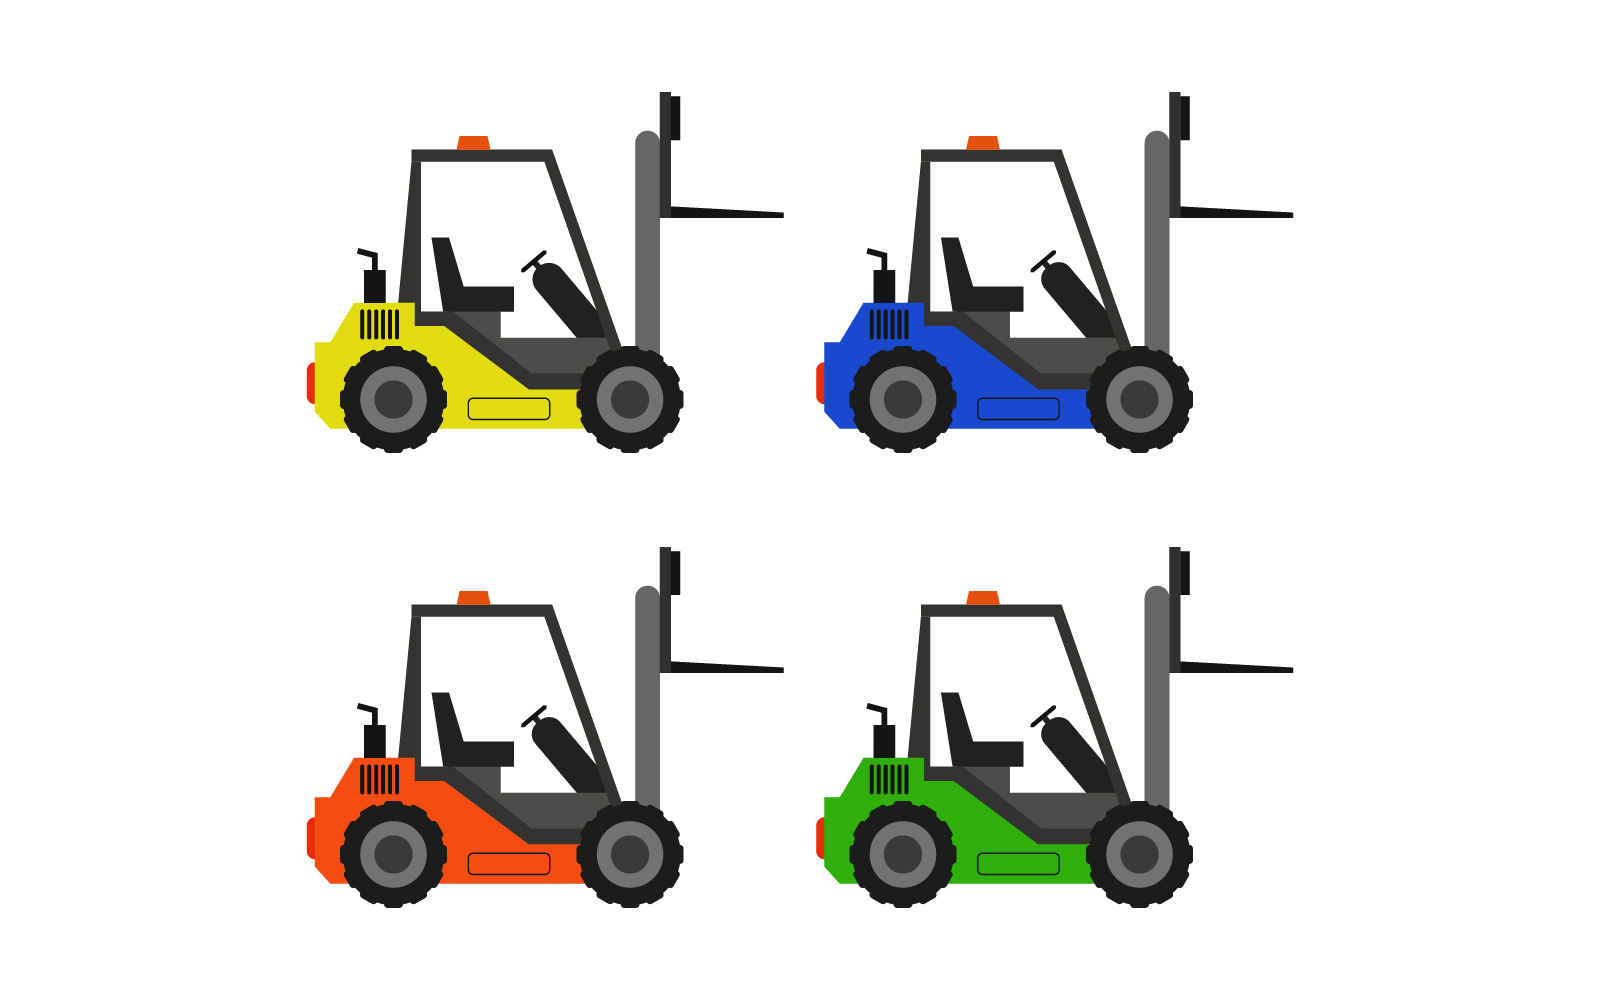 Forklift illustrated in vector